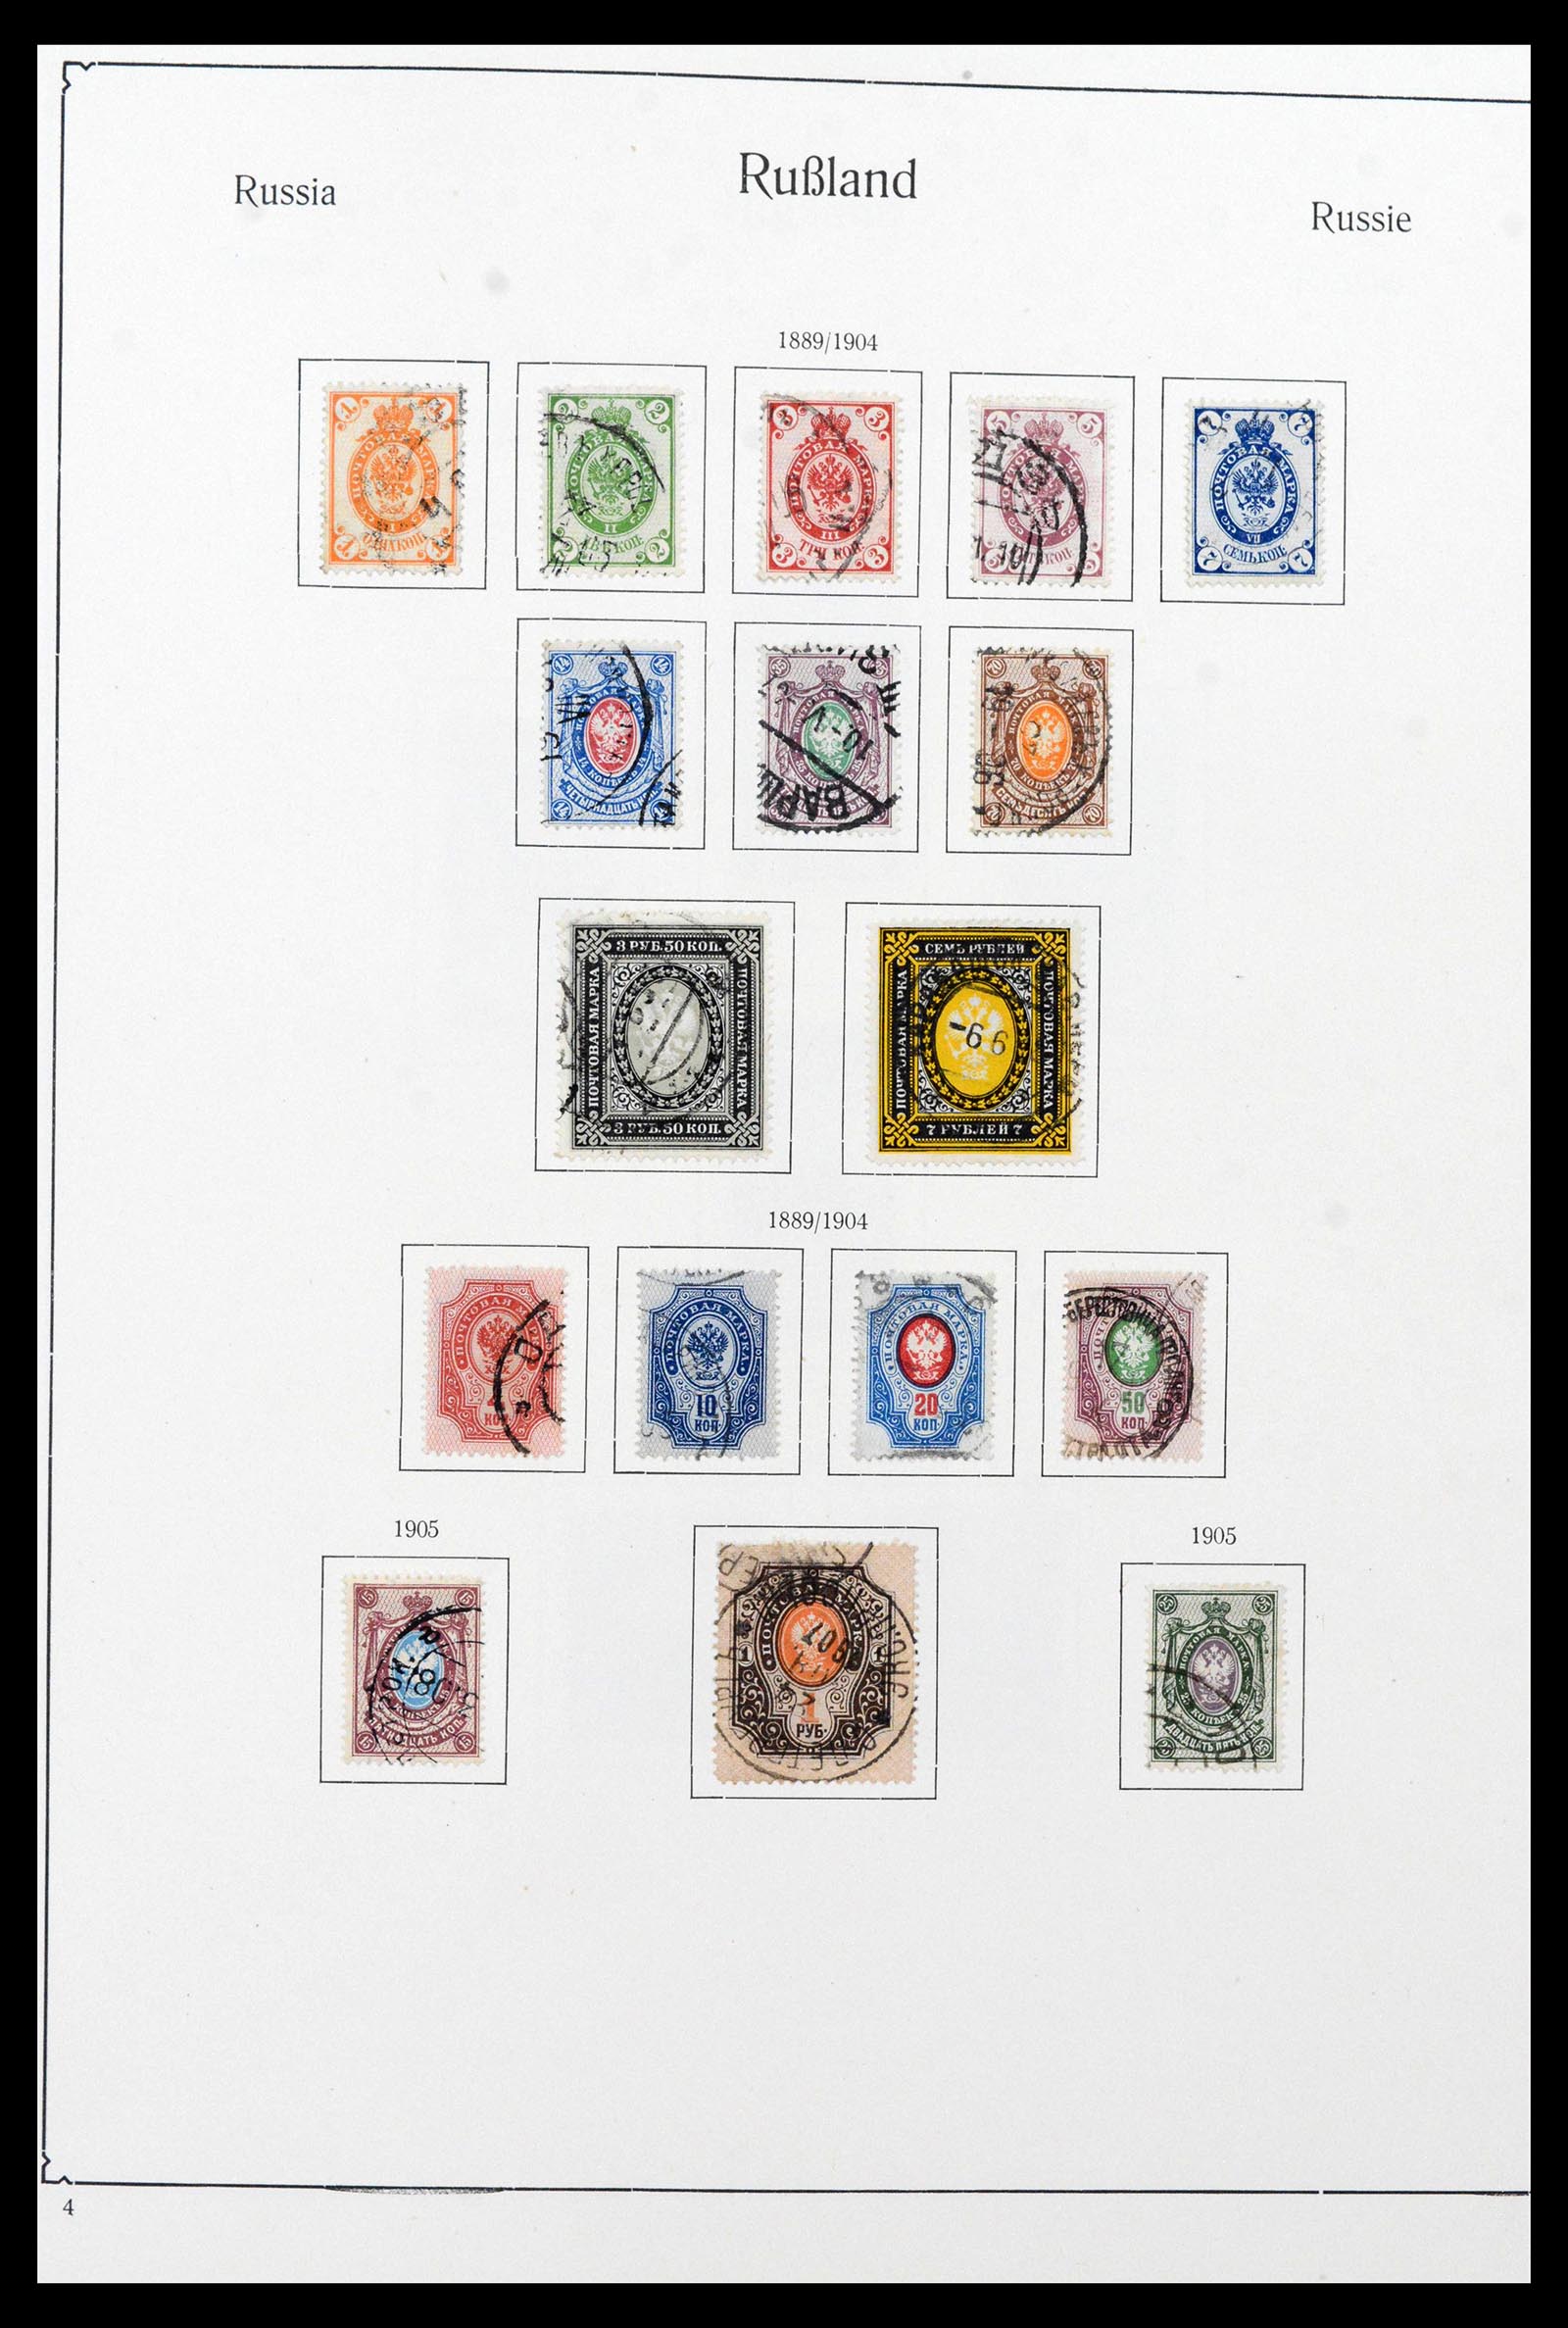 39086 0061 - Stamp collection 39086 Russia and territories 1858-1930.